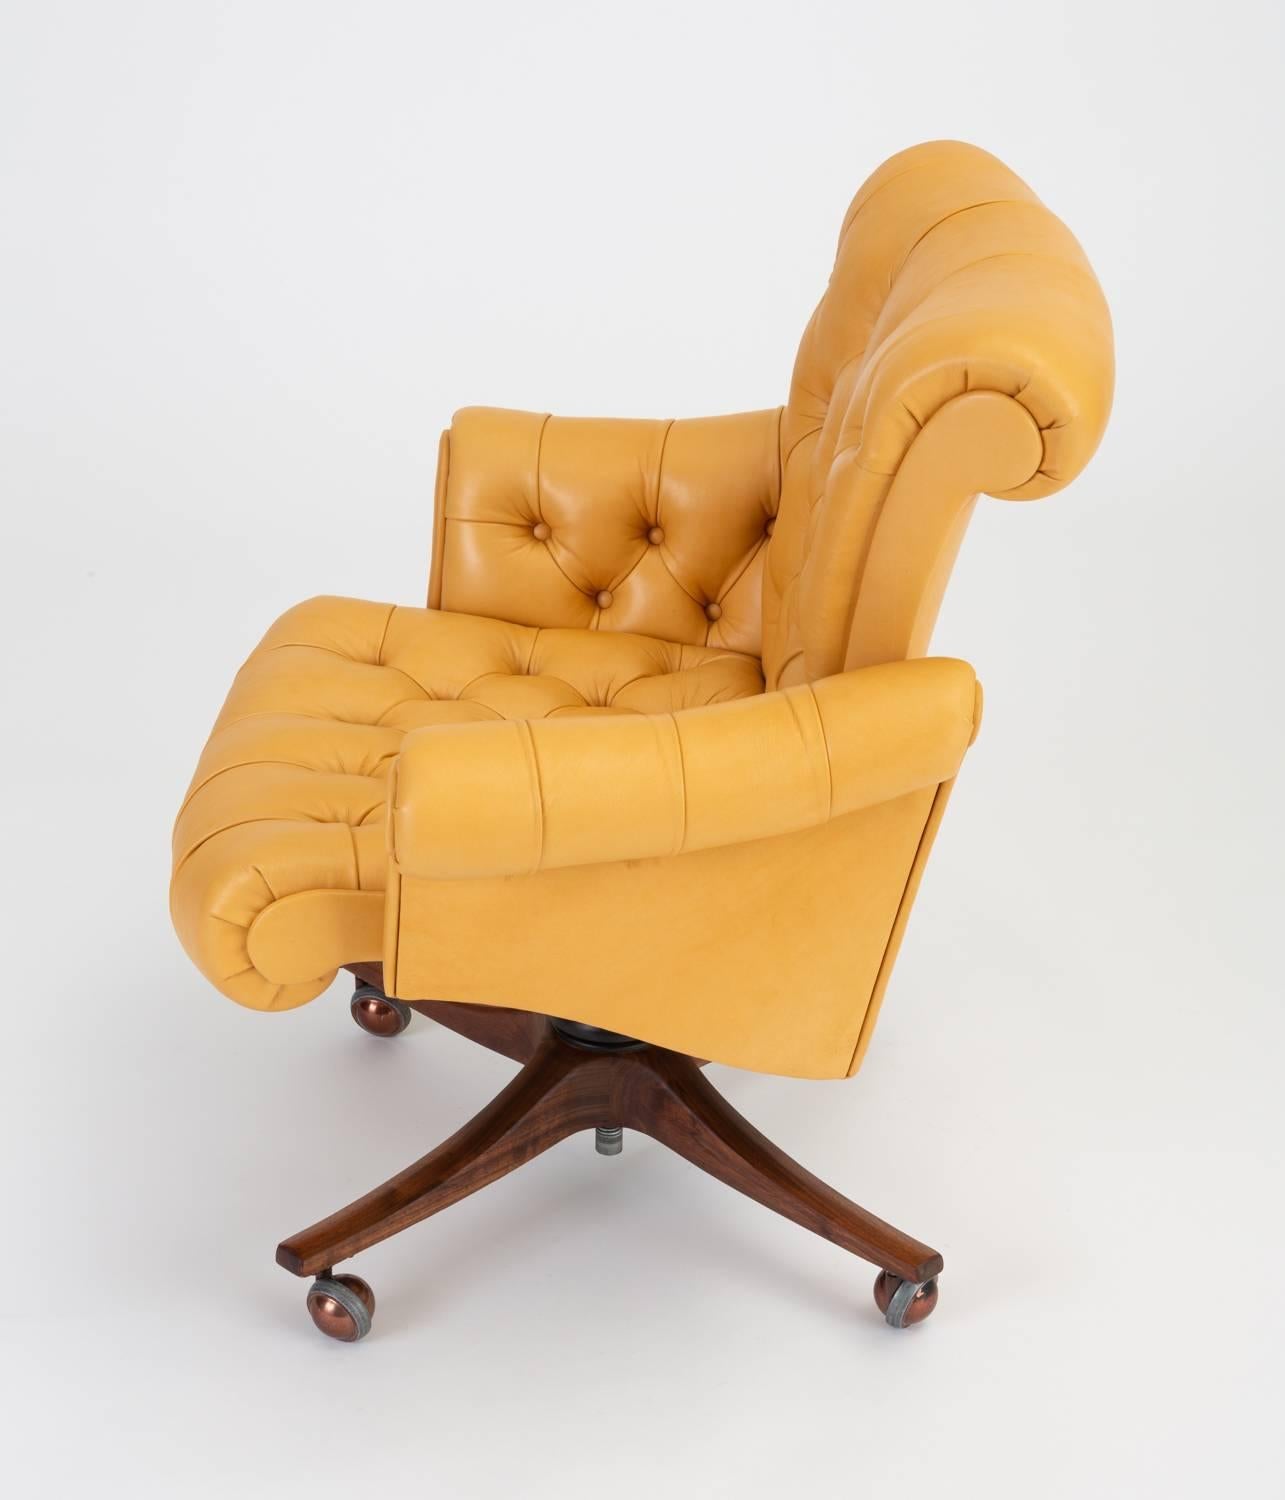 Model 932 “In Clover” Executive Office Chair by Edward Wormley for Dunbar 4